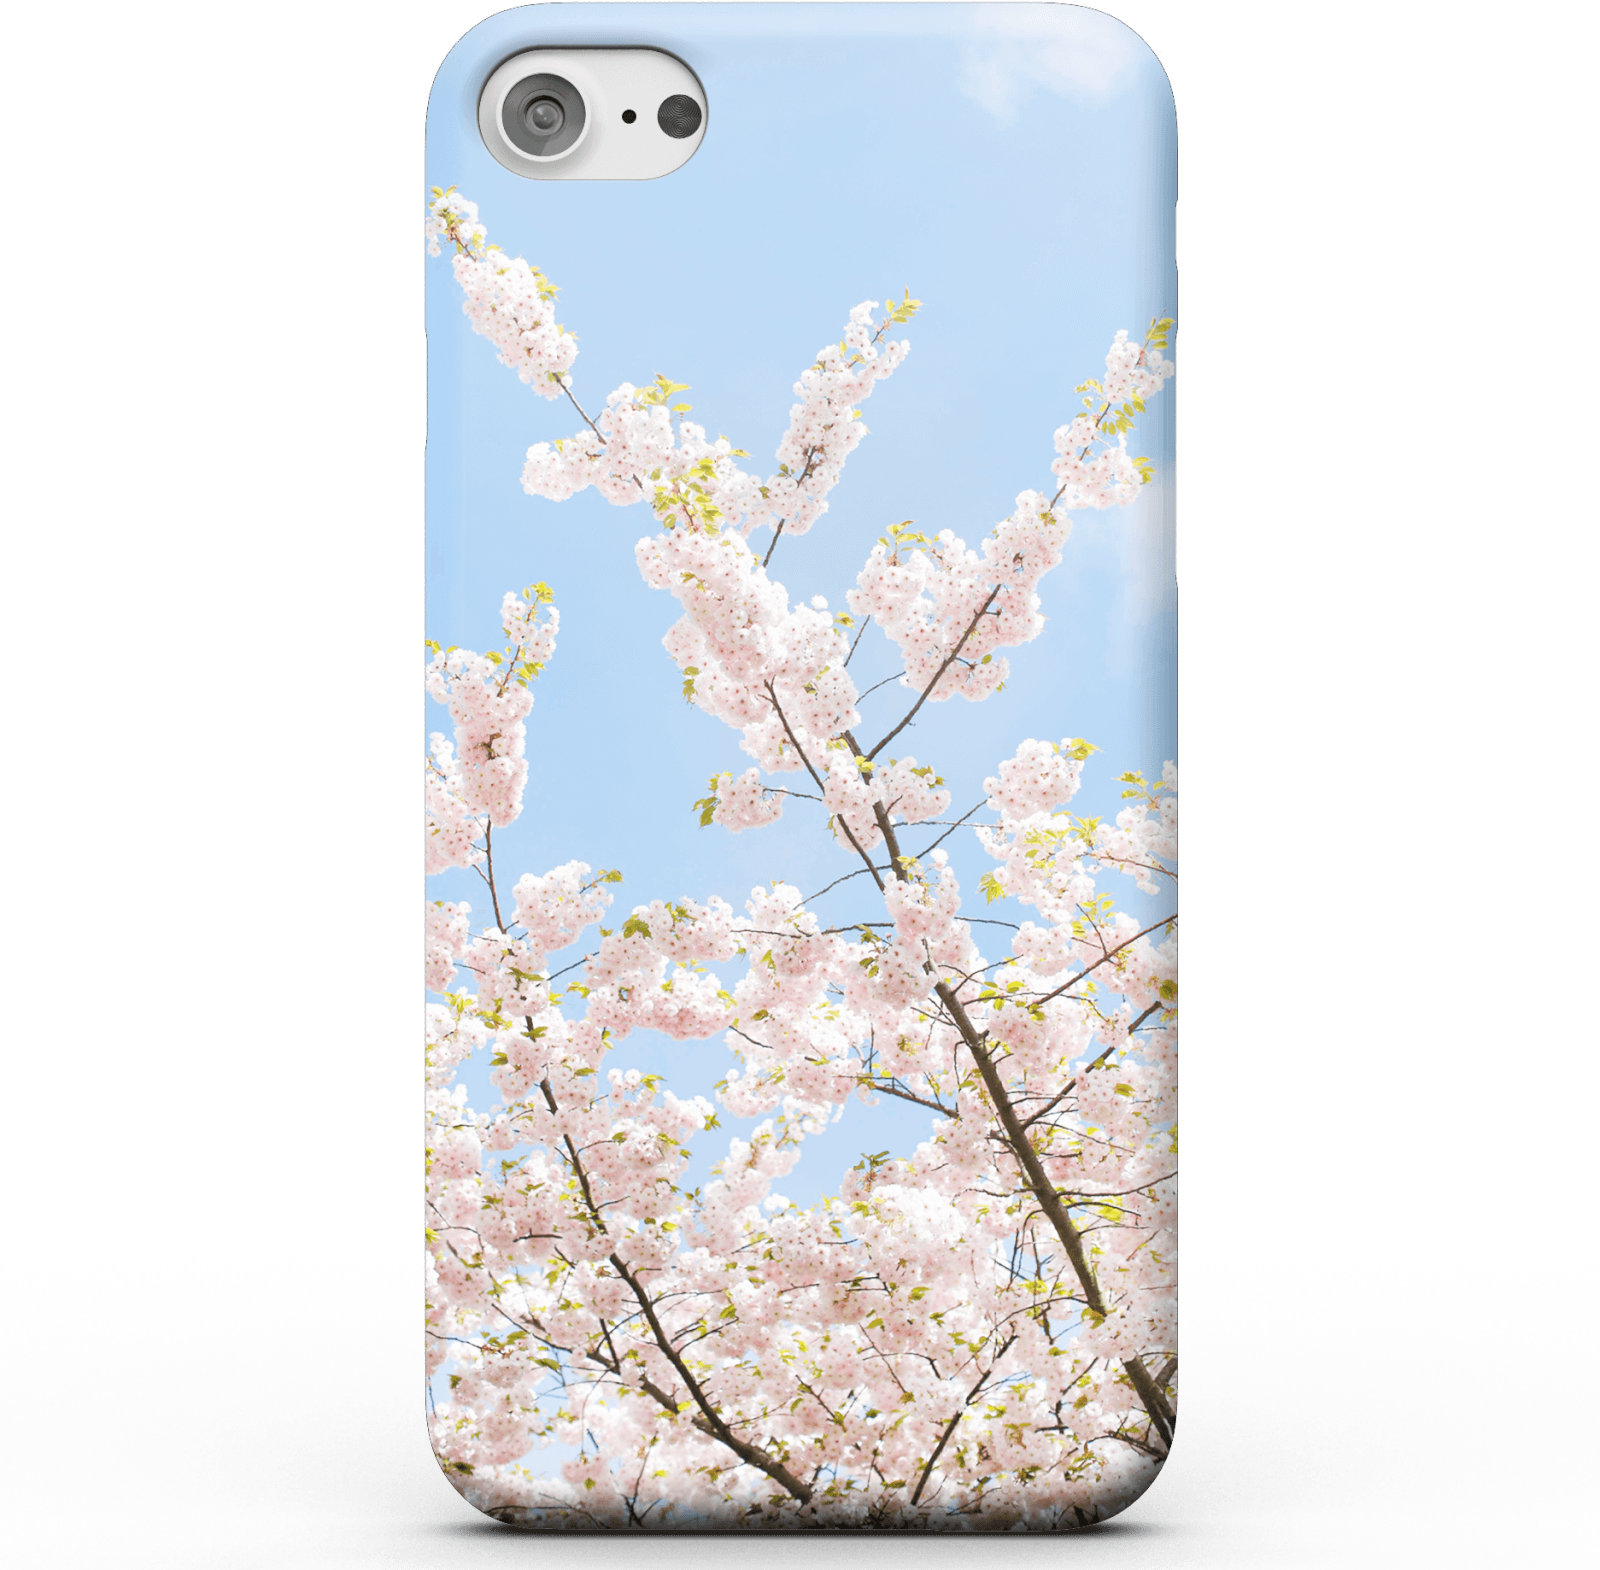 Spring Phone Case for iPhone and Android - iPhone 5/5s - Snap Case - Matte